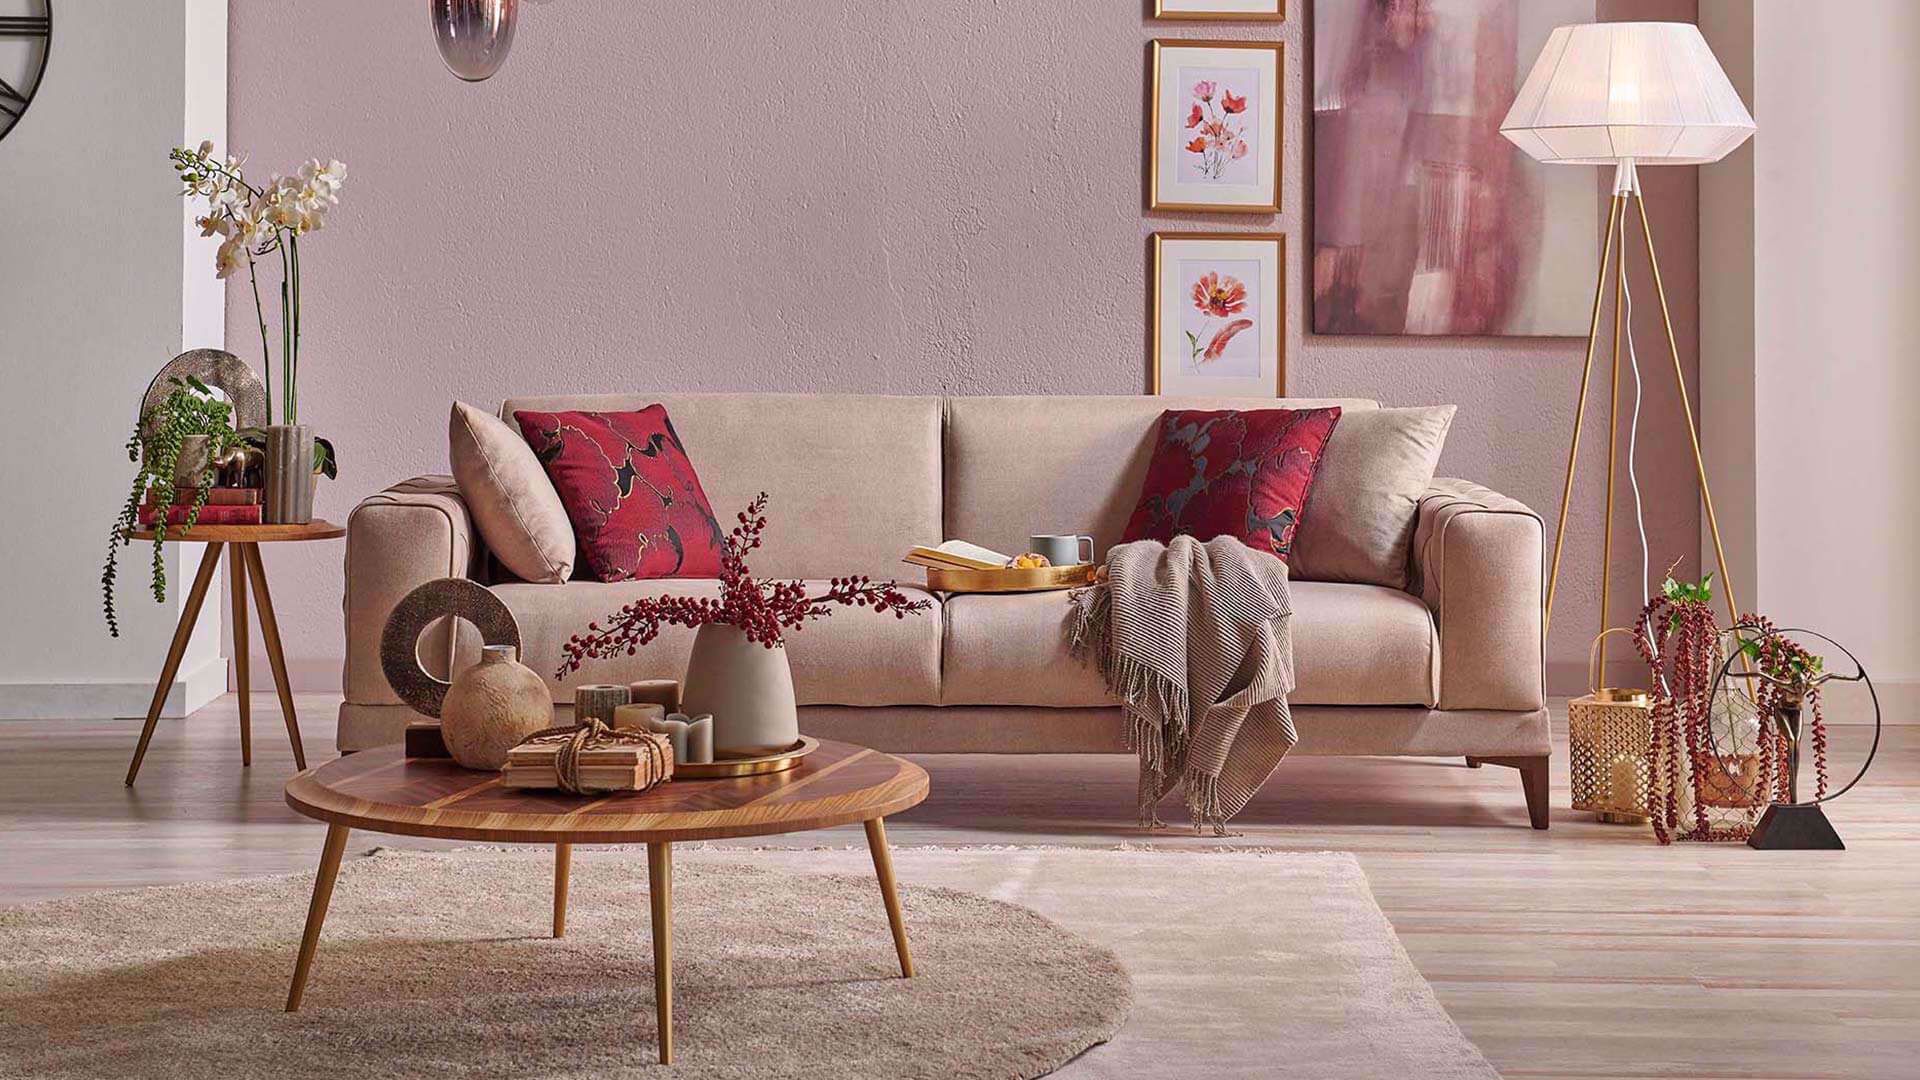 Gyna 2 Seater Sofa/Bedded